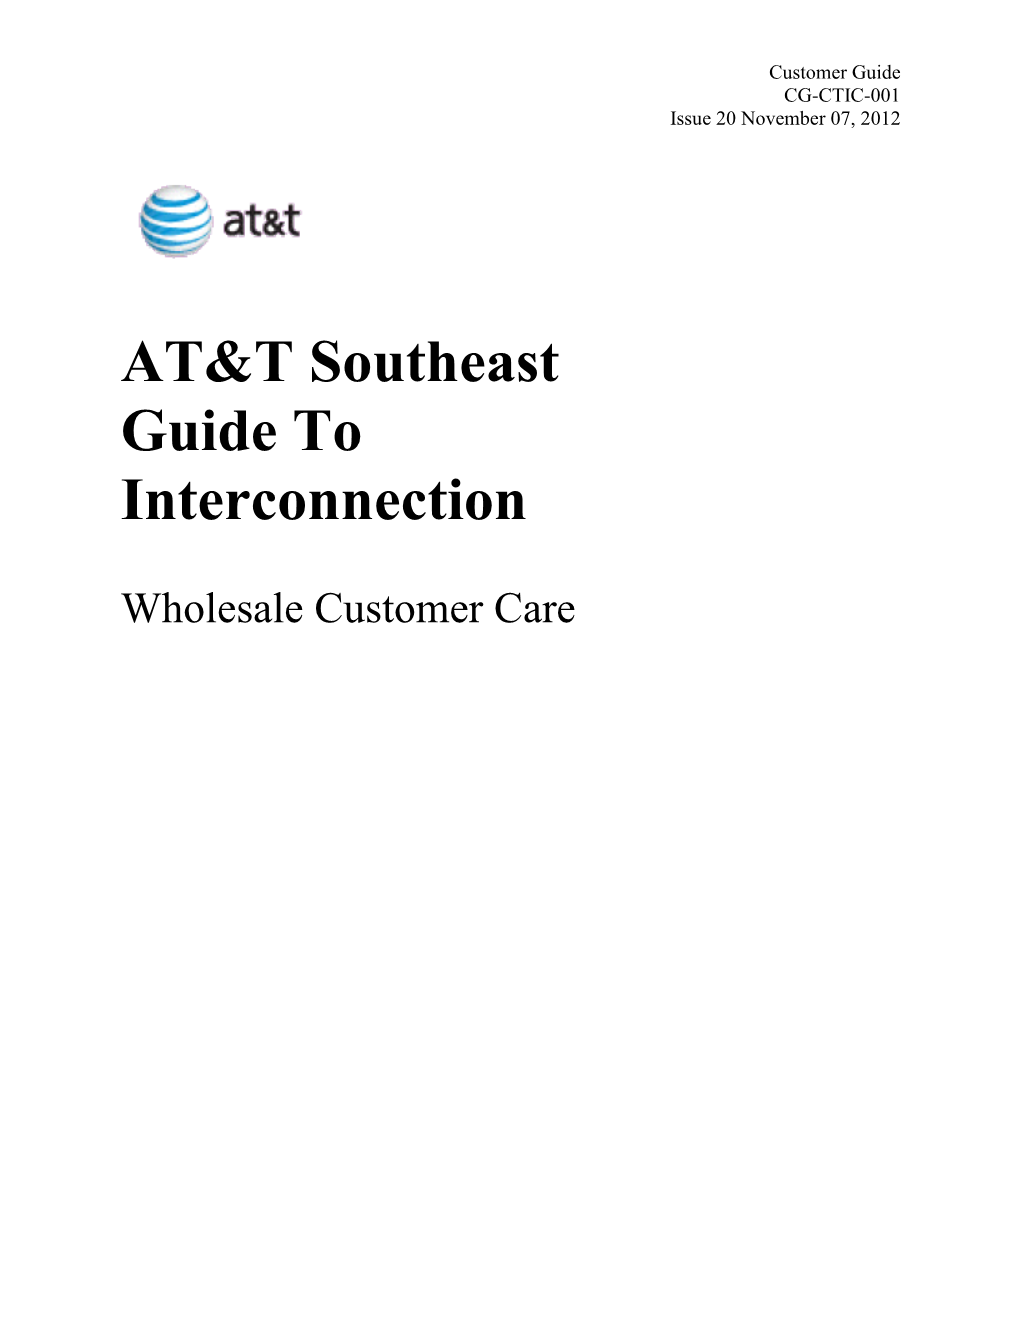 AT&T Southeast Guide to Interconnection